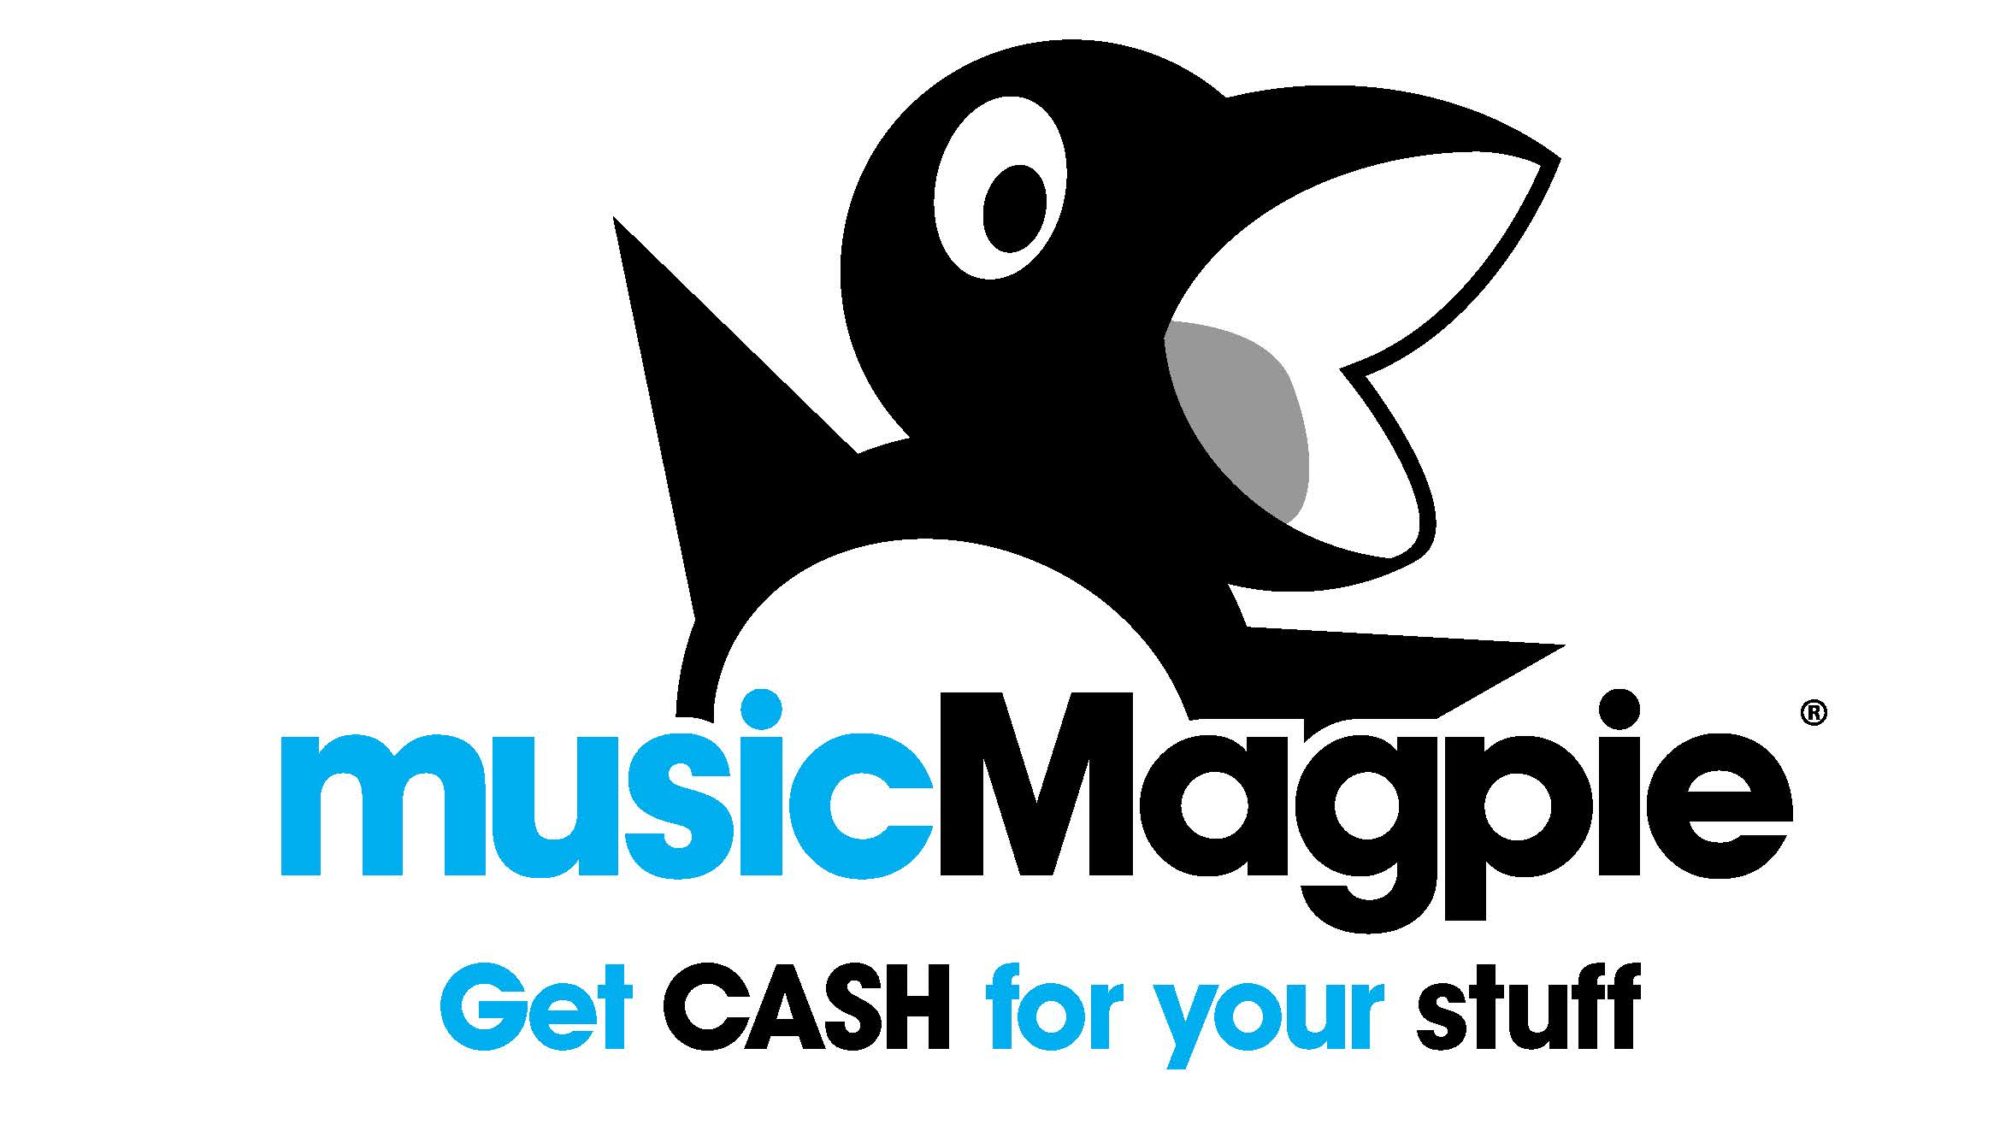 musicMagpie Store appoints R.O.EYE for social